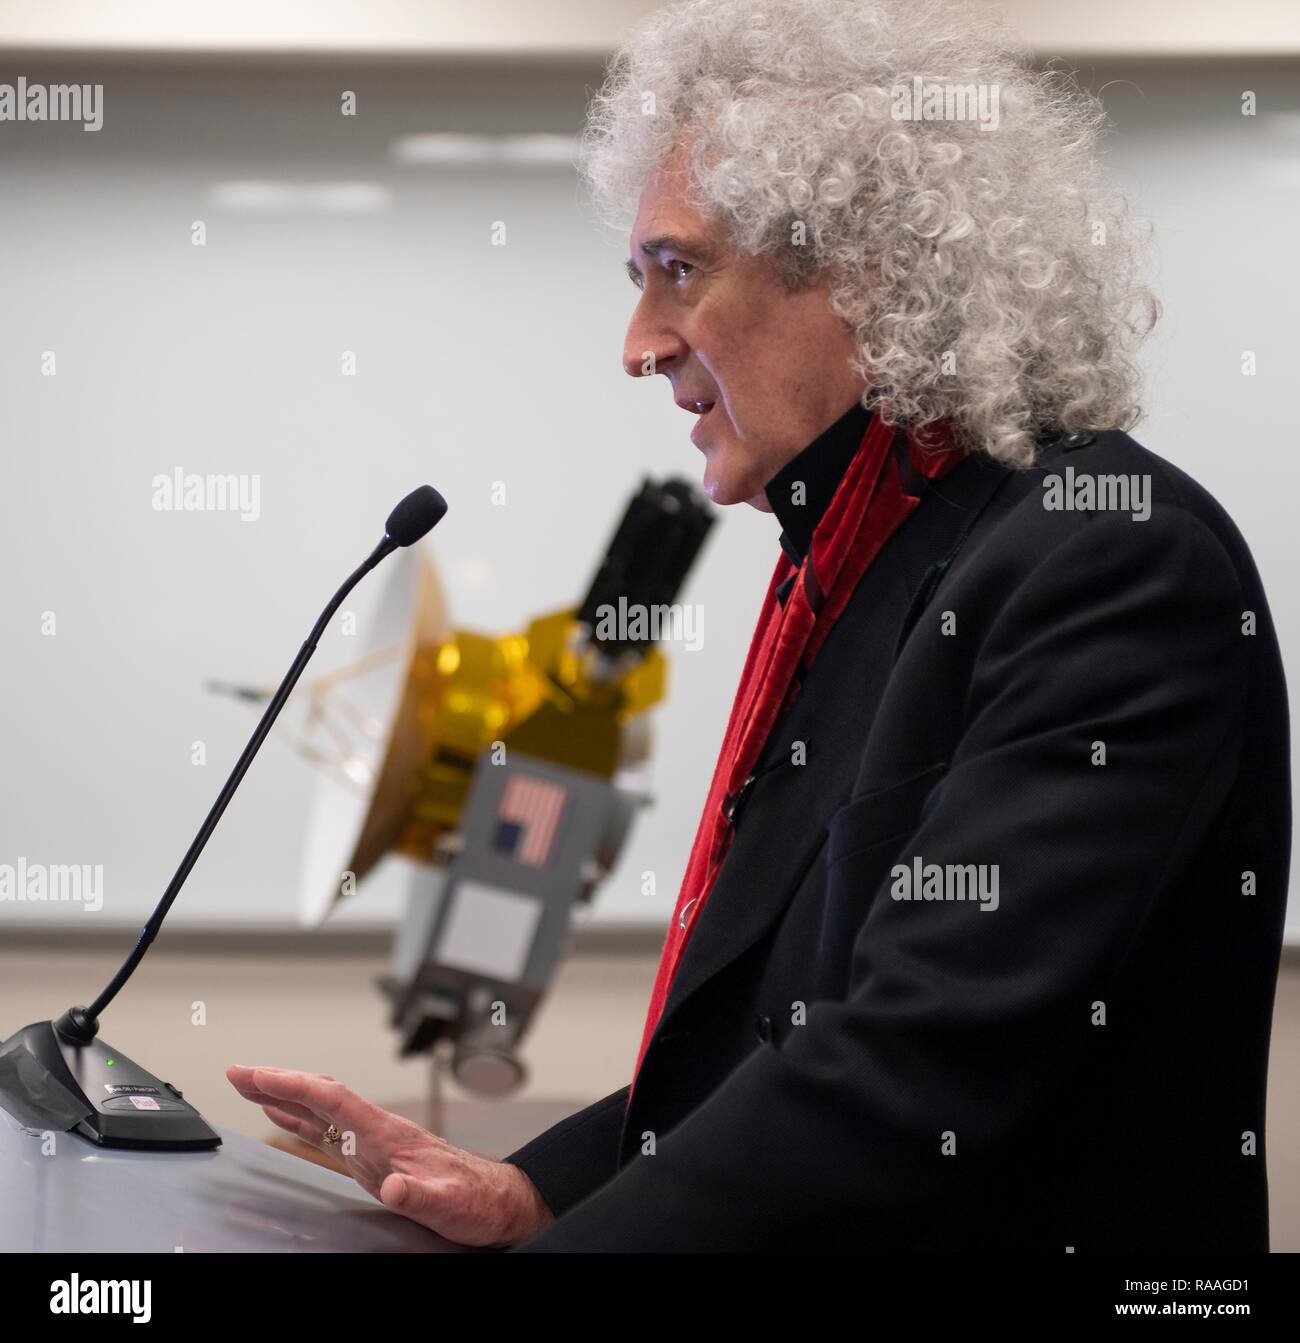 Brian May, lead guitarist of the rock band Queen and astrophysicist during a briefing prior to the expected flyby of Ultima Thule by the New Horizon spacecraft at Johns Hopkins University Applied Physics Laboratory December 31, 2018 in Laurel, Maryland. The flyby by the space probe occurred 6.5bn km (4bn miles) away, making it the most distant ever exploration of an object in our Solar System. Stock Photo